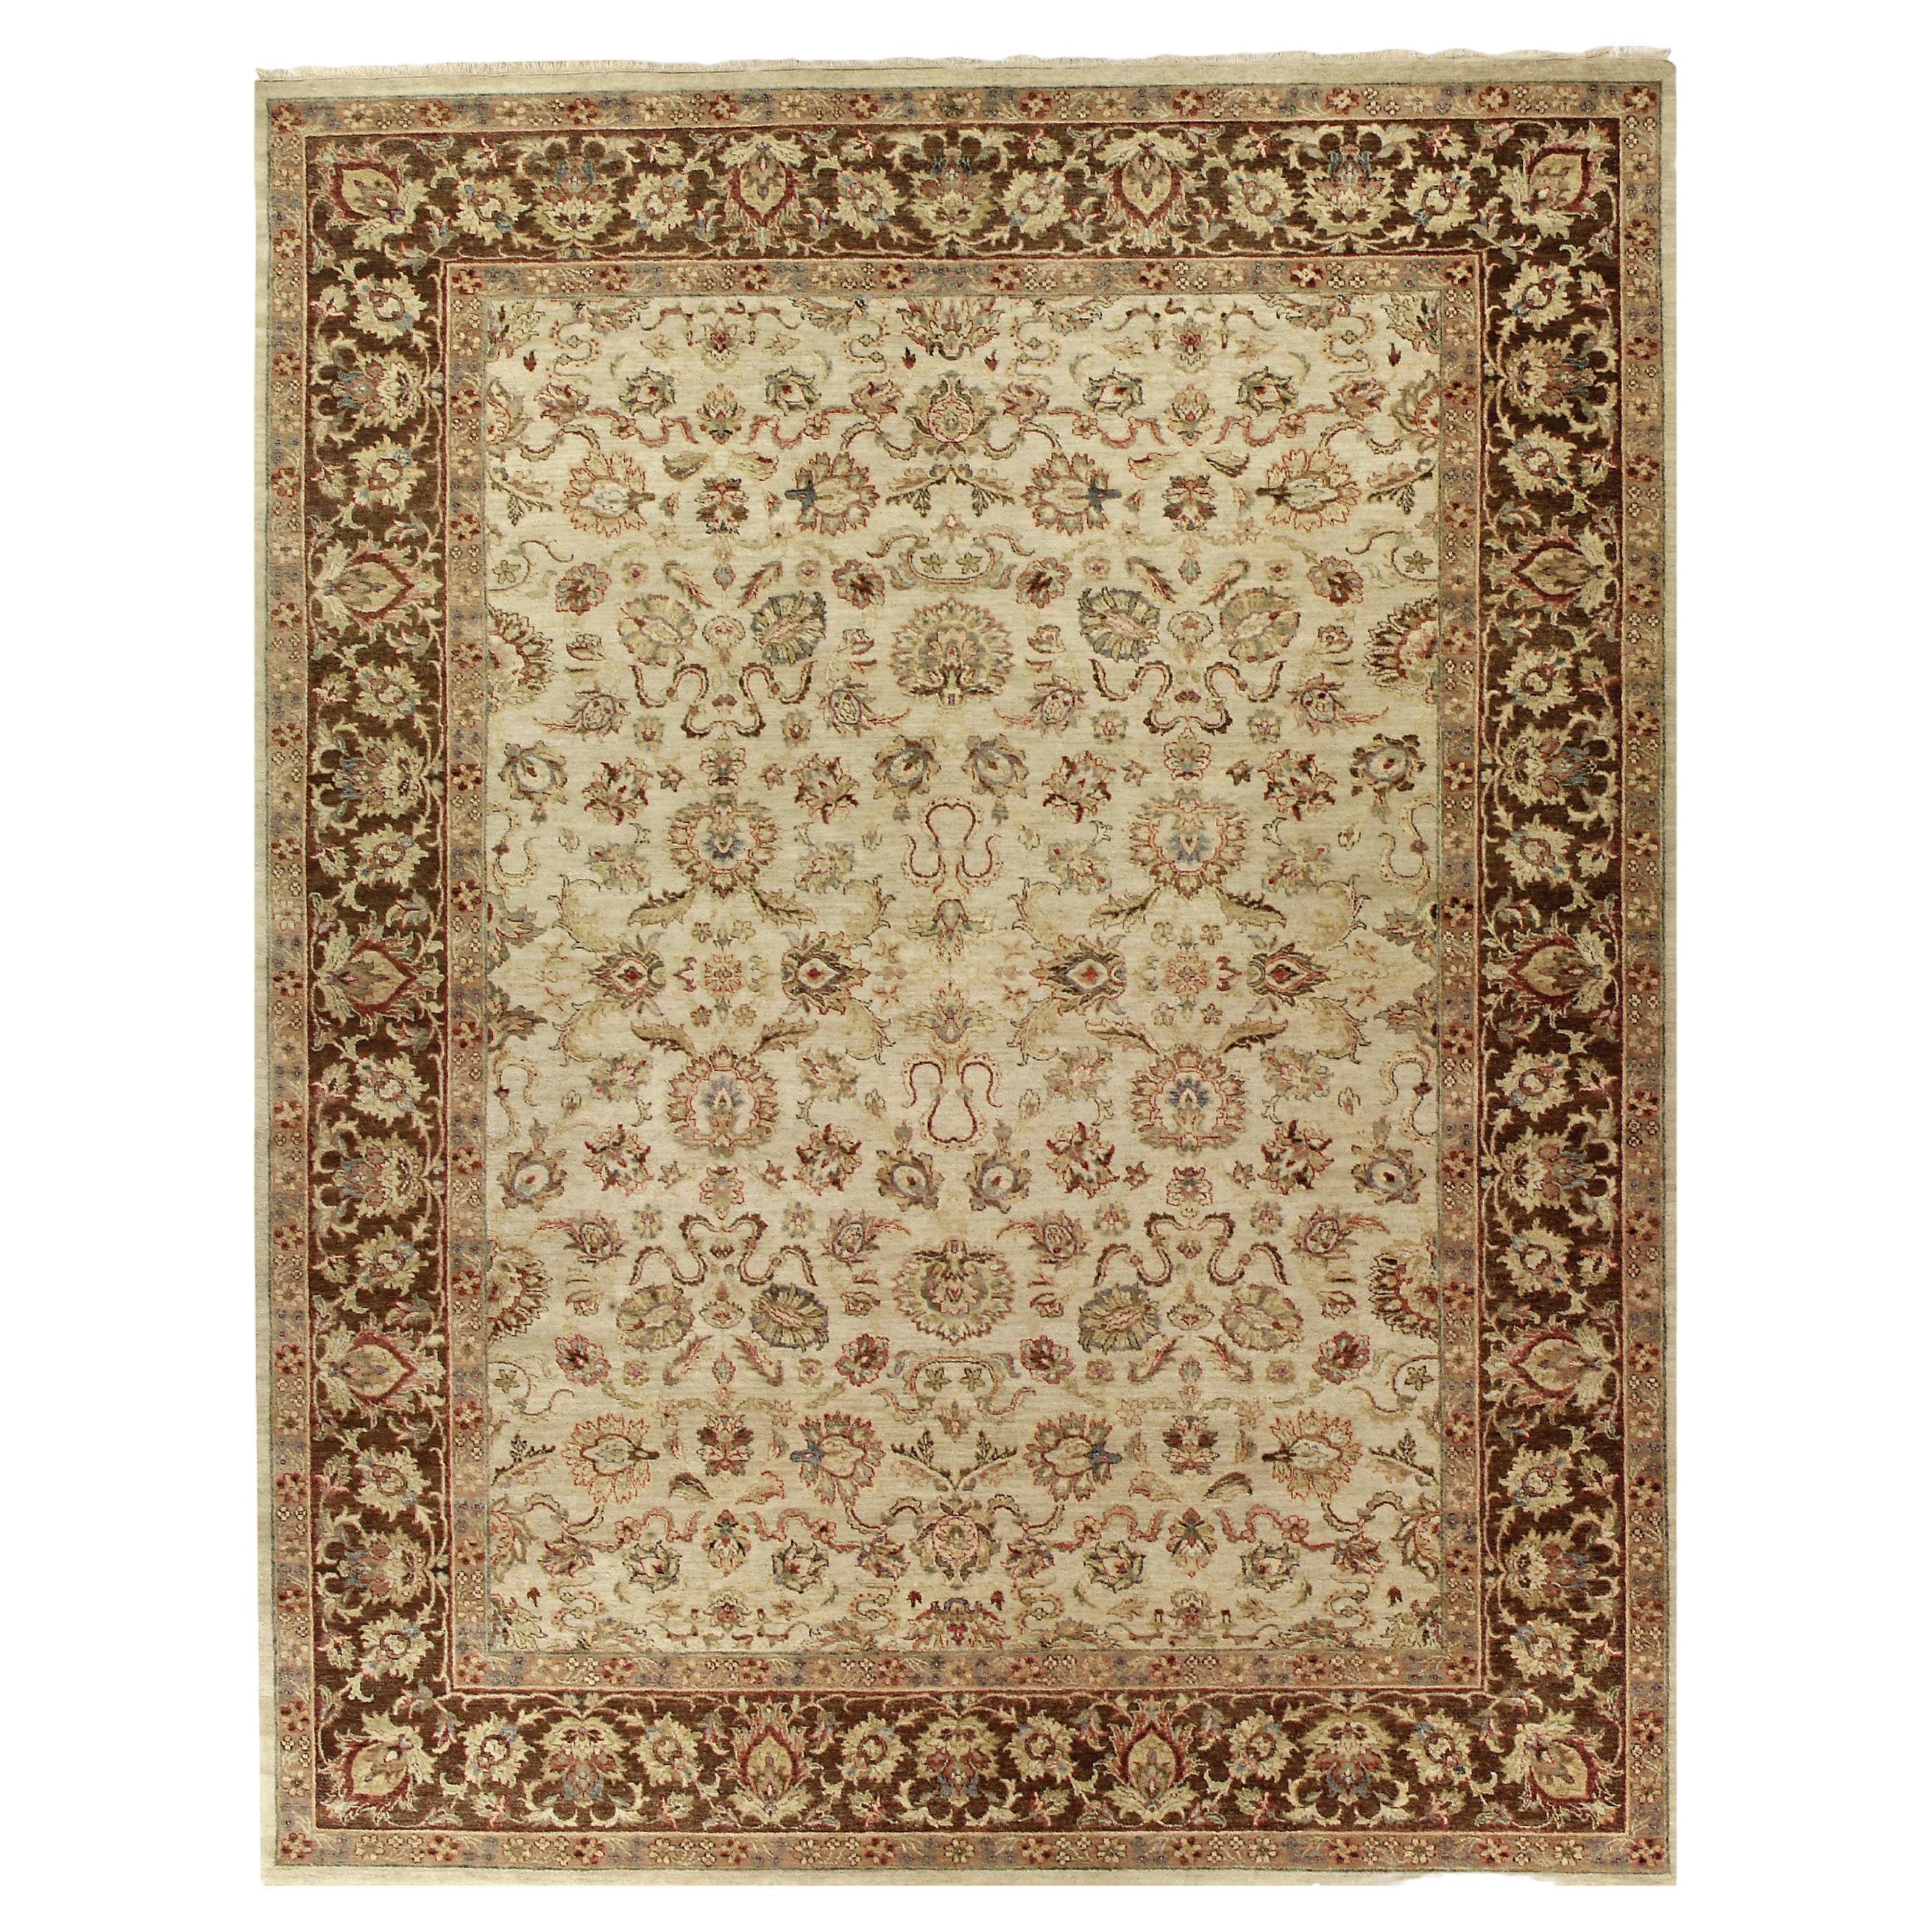 Luxury Traditional Hand-Knotted Cream/Mocha 12X18 Rug